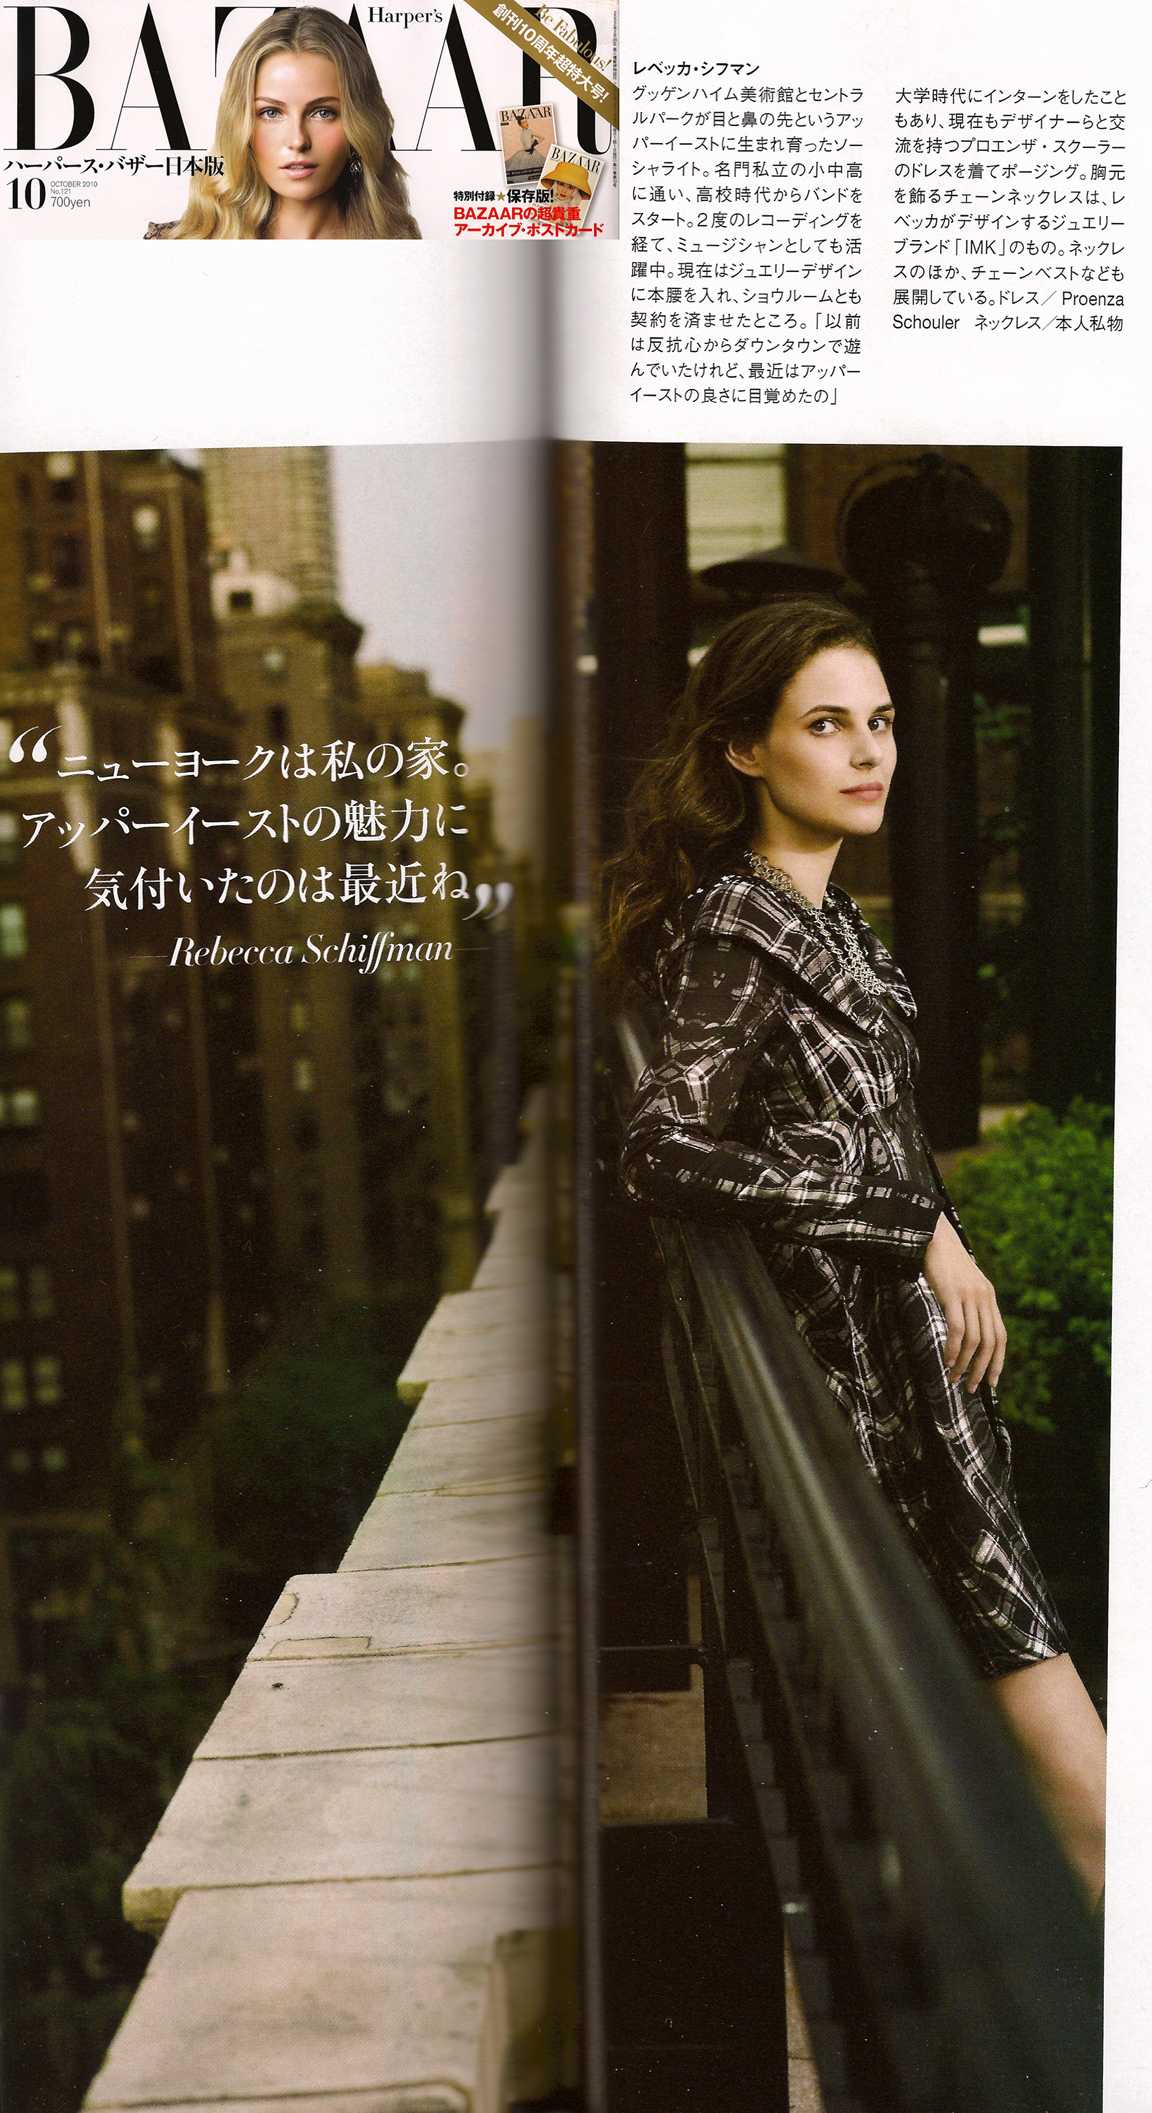 Rebecca Schiffman wears Proenza Schouler and her own chainmail necklace in Harper's Japan